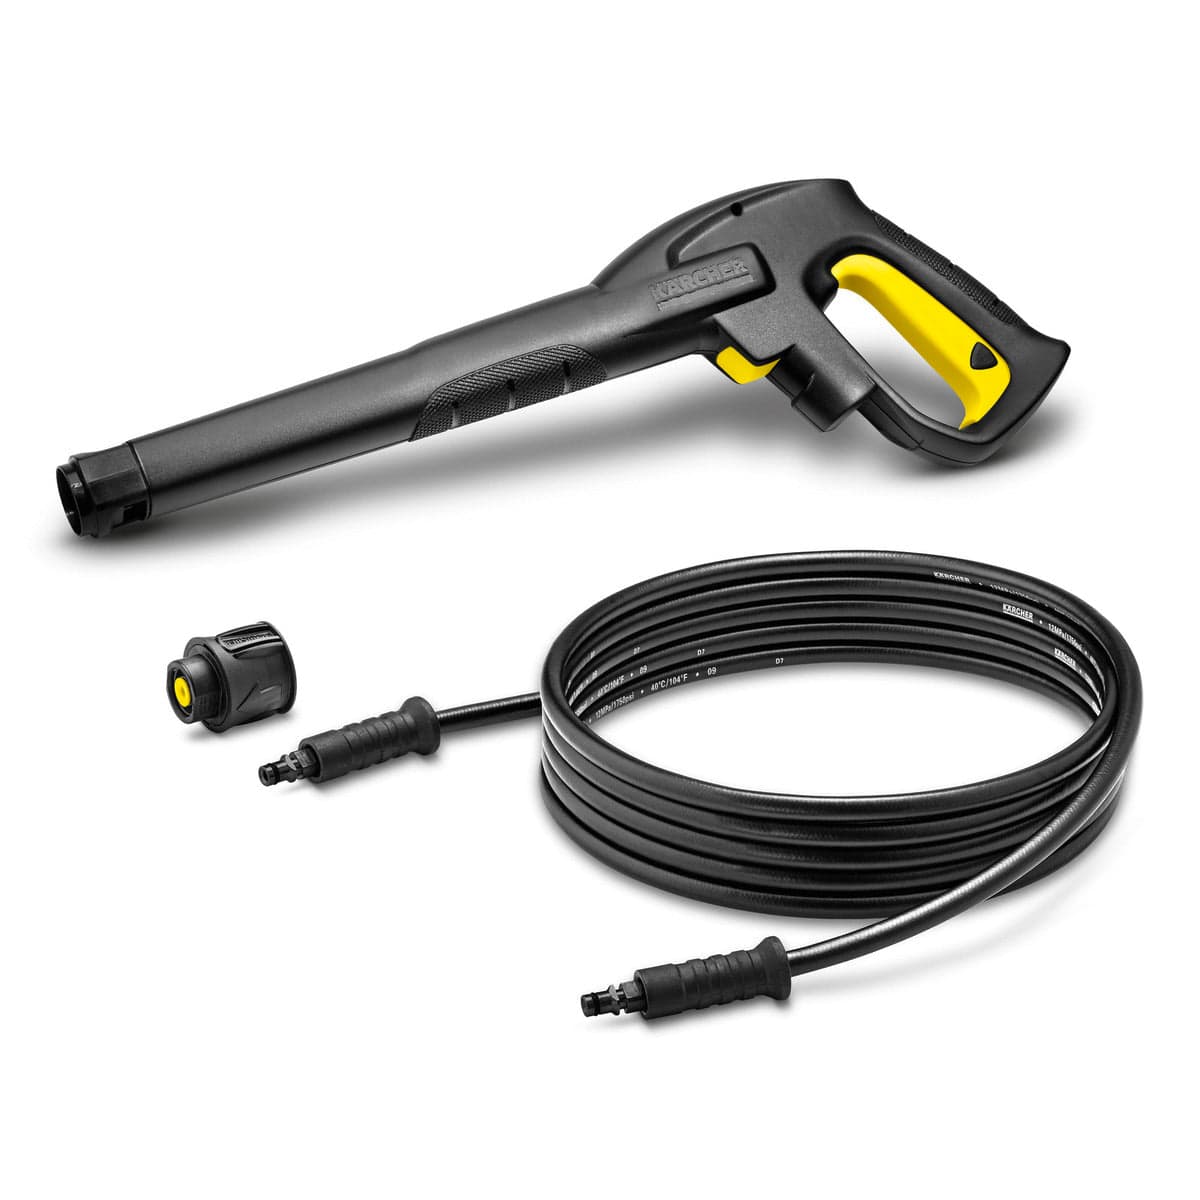 Karcher High Pressure Washer Hose Kit - HK 4 | Supply Master | Accra, Ghana Cleaning Equipment Accessories Buy Tools hardware Building materials